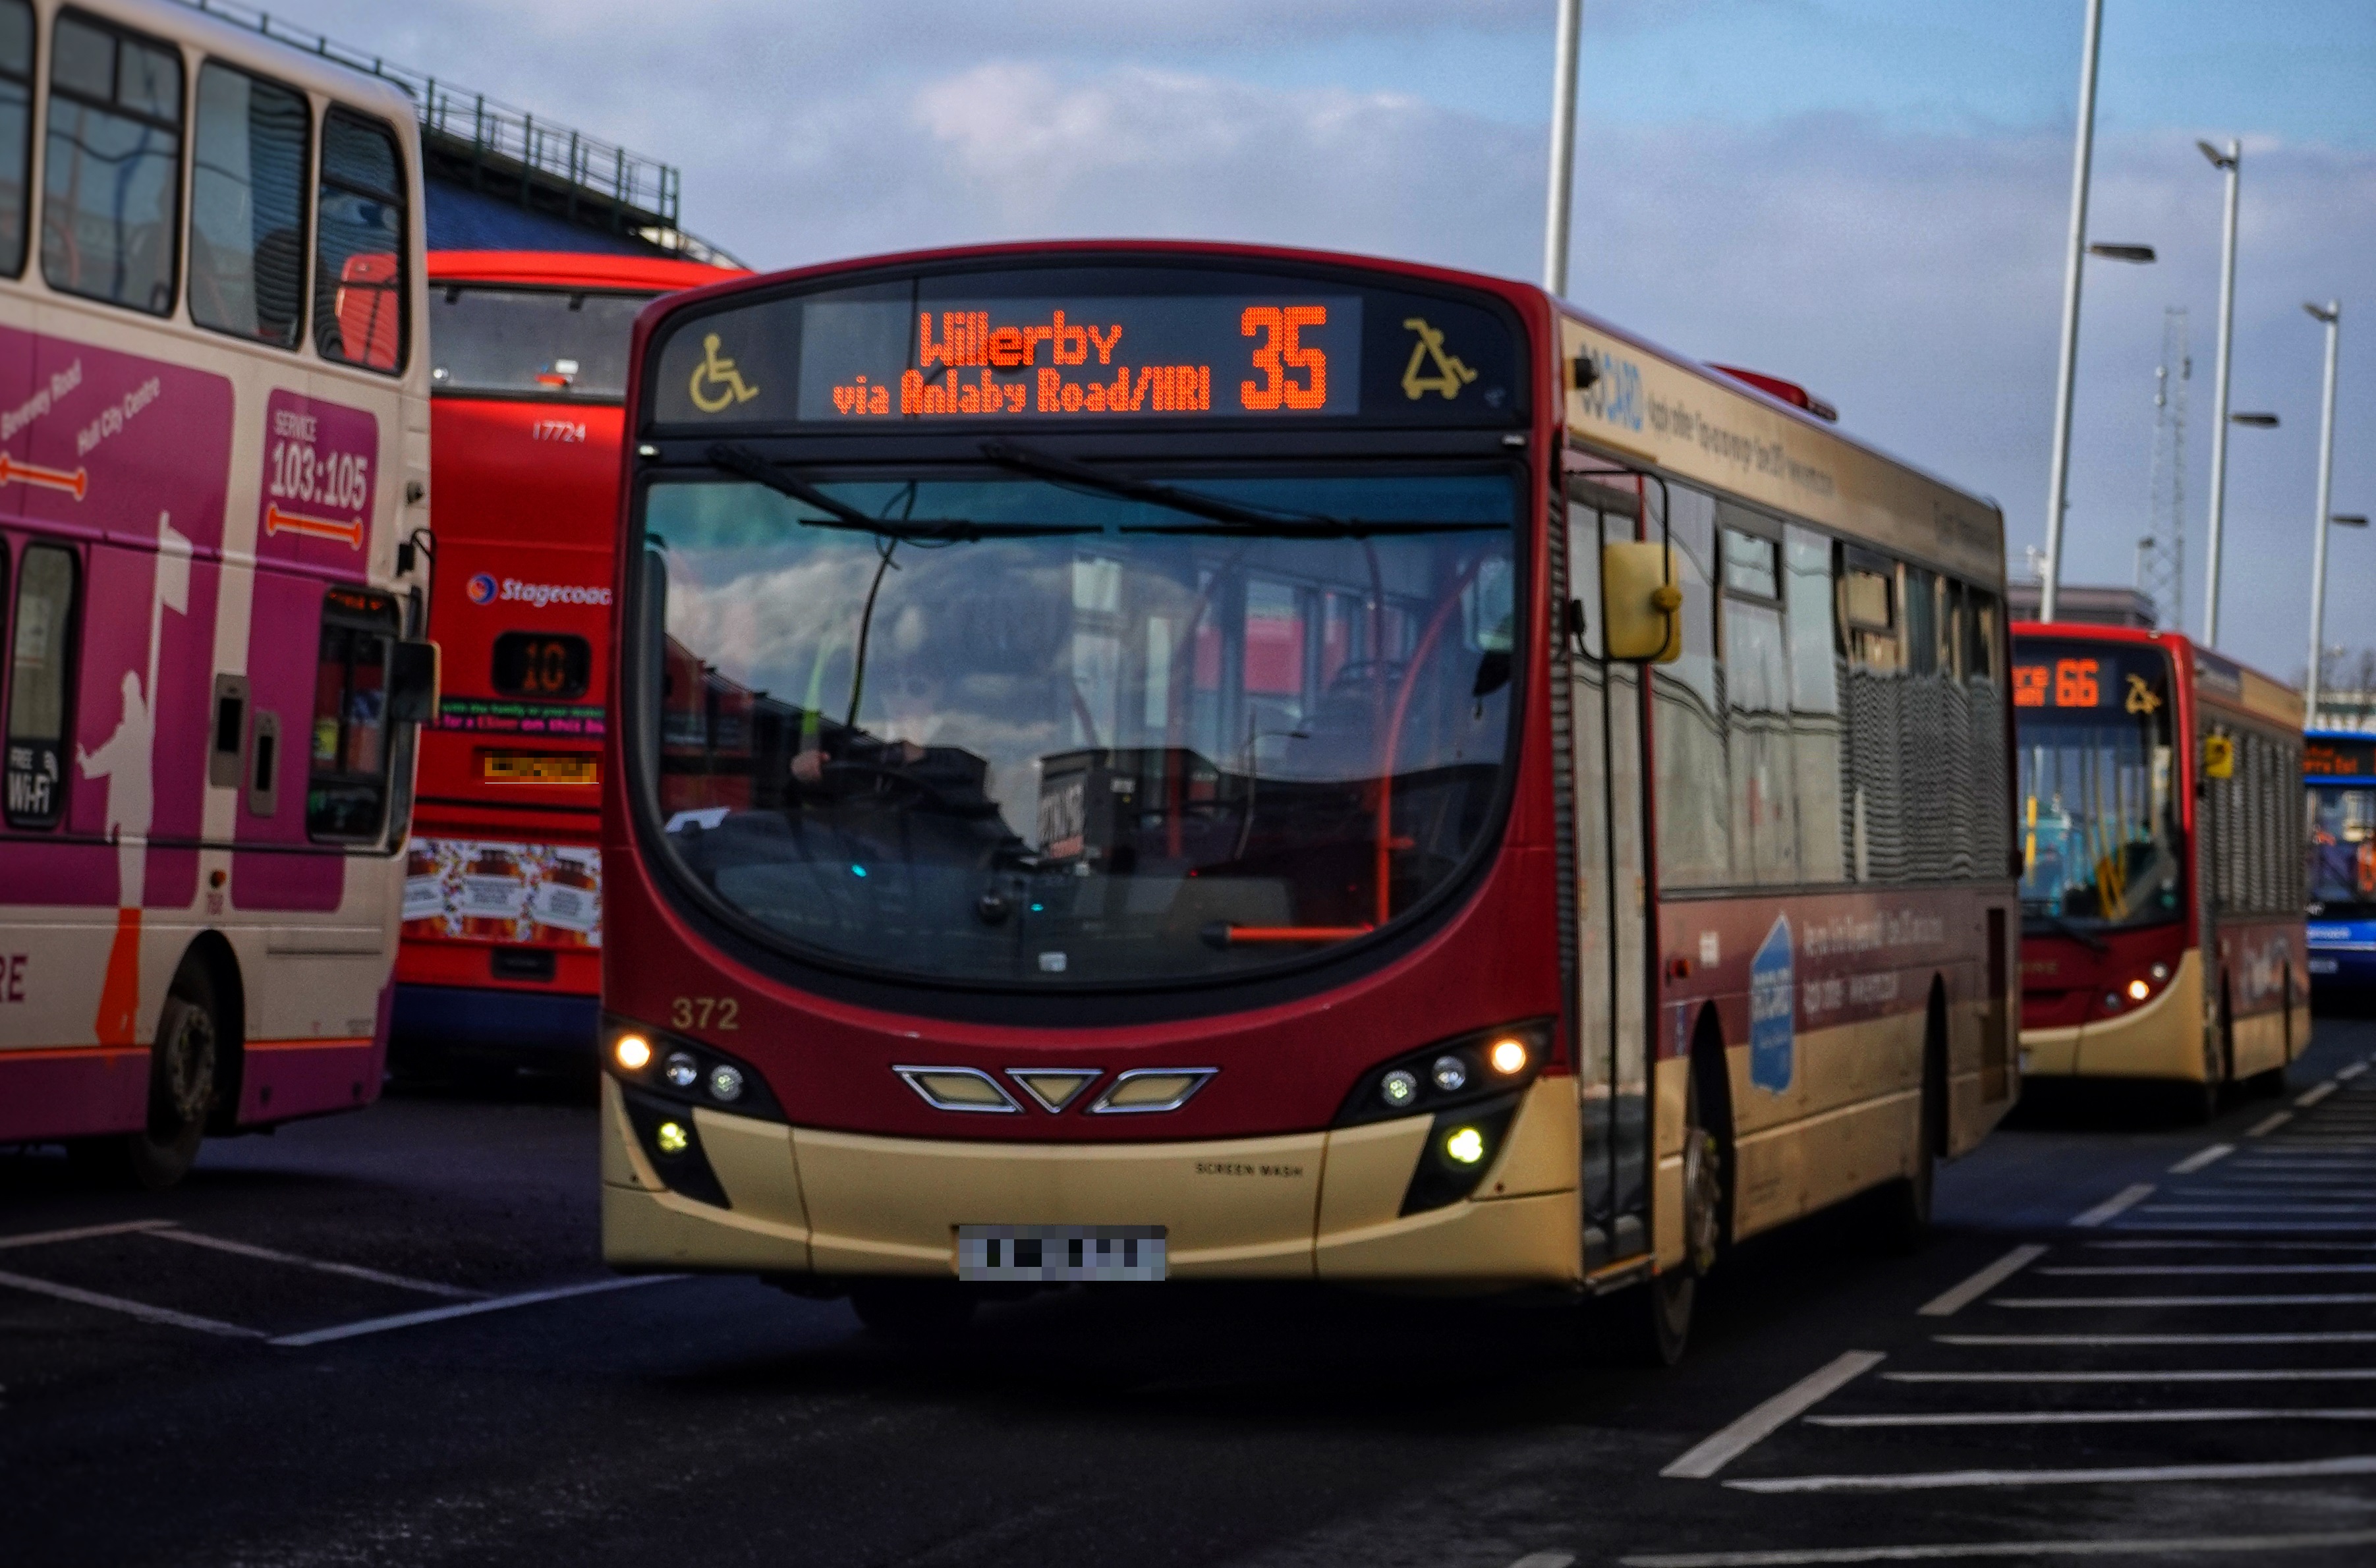 The KAT Hull Card will give those aged 19 and under the freedom and flexibility to travel across Hull and parts of the East Riding for just £10 a week.